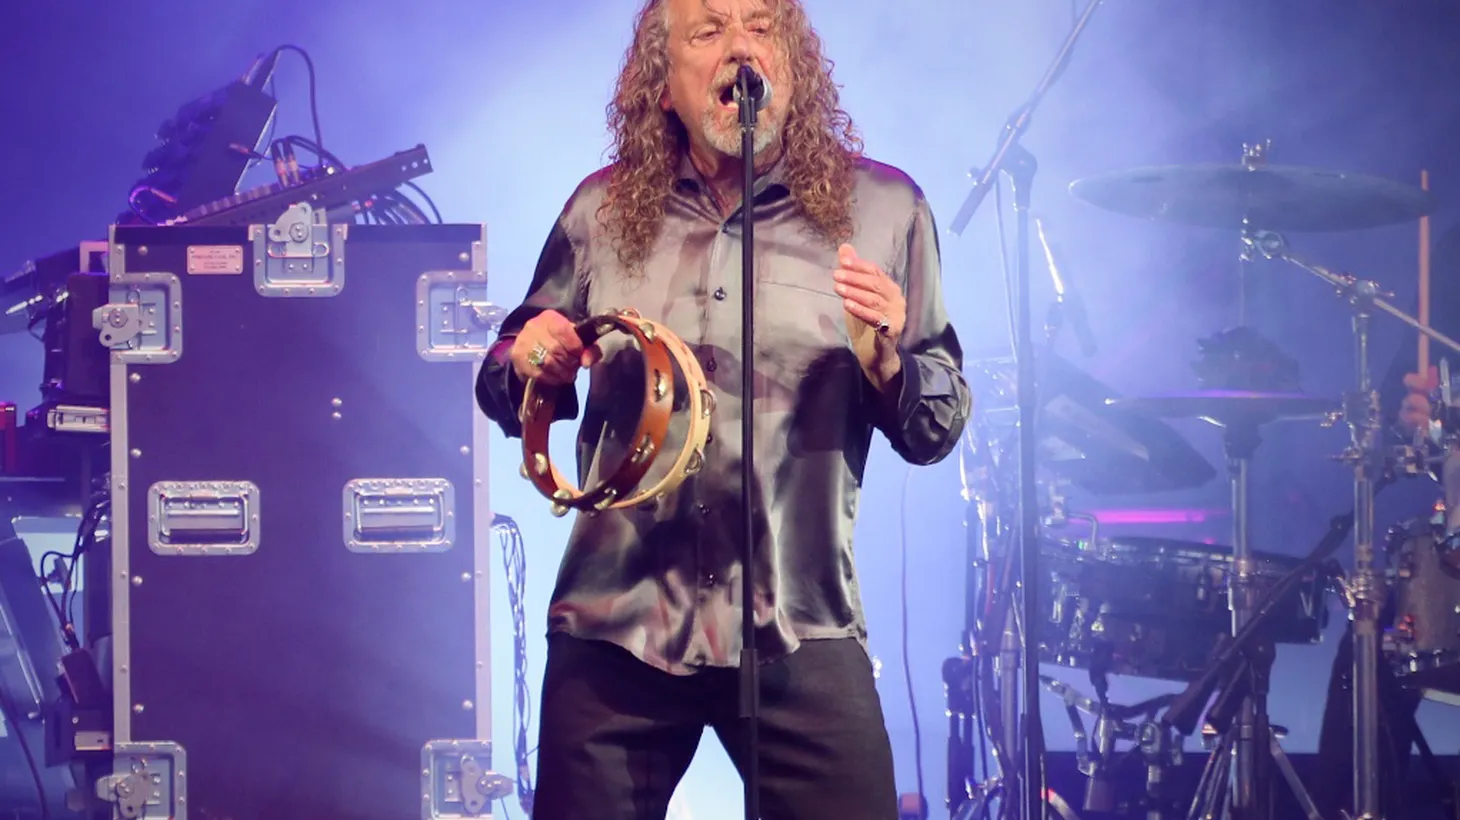 Fifty years into his career, Robert Plant shows no signs of slowing down. After many successful collaborations, the former Led Zeppelin vocalist returned to his native England to re-examine his place as a songwriter. (10am)